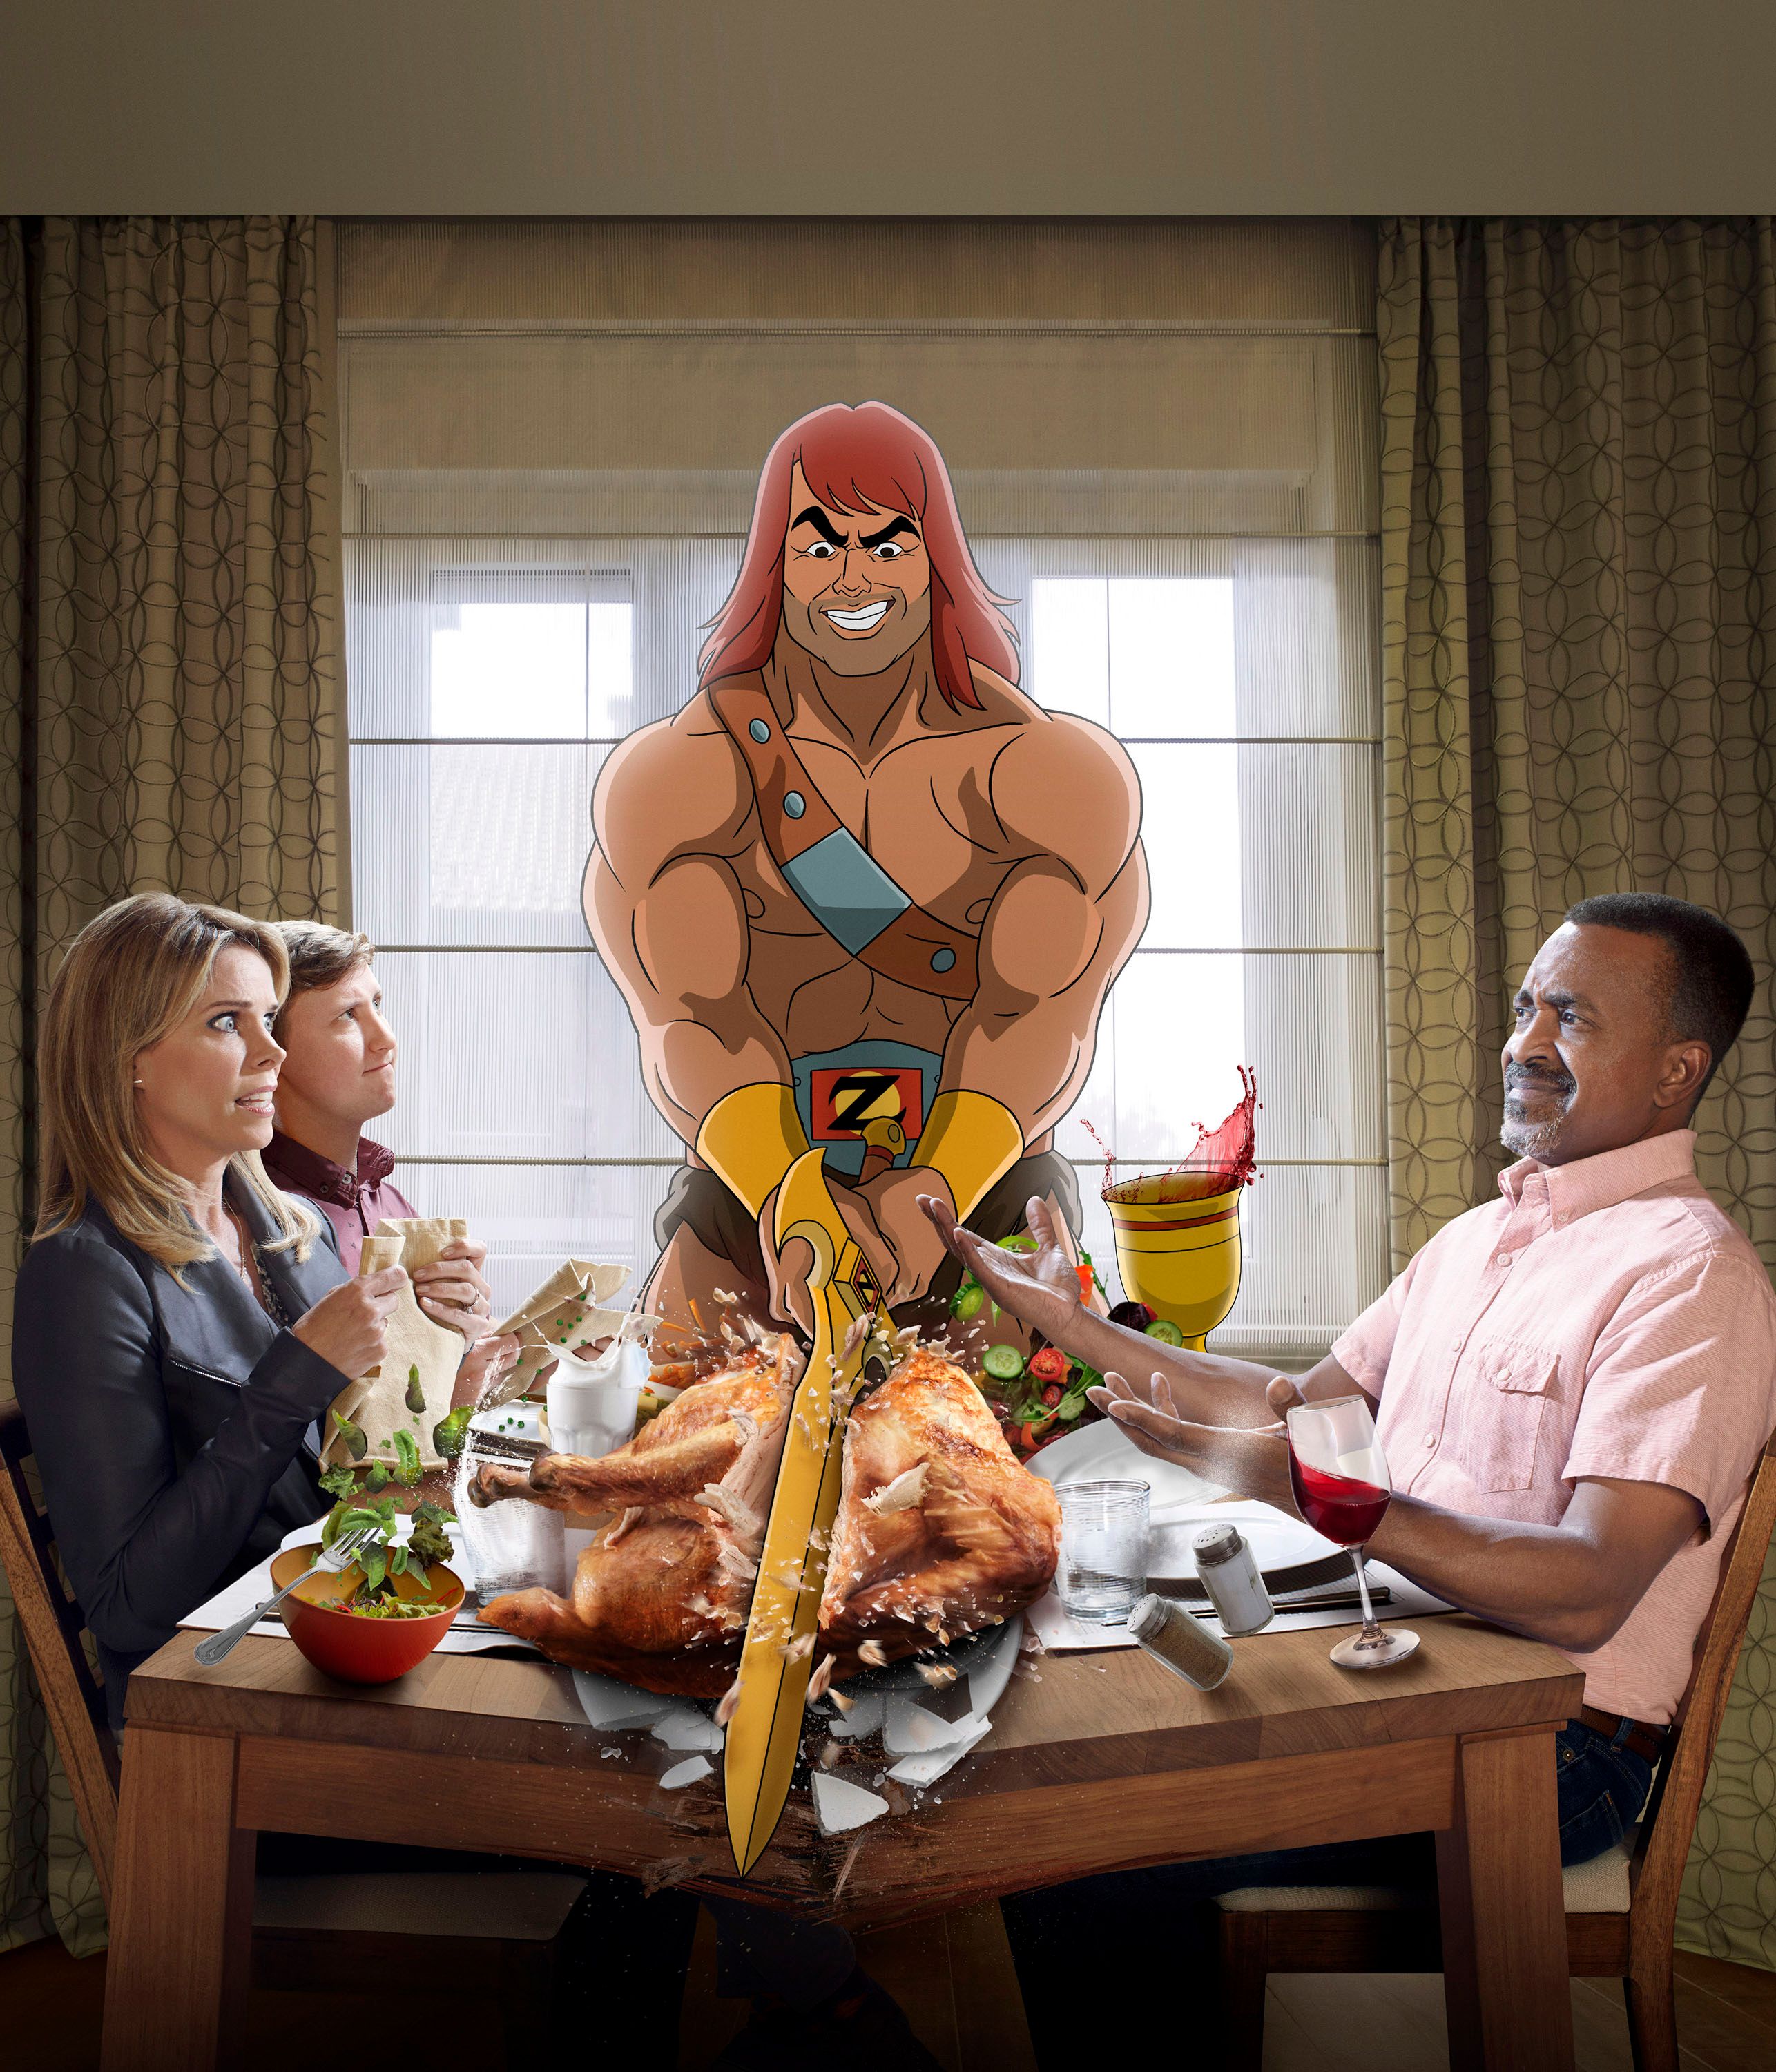 Son of Zorn 13 Things to Know about Fox's Crazy New Series Collider